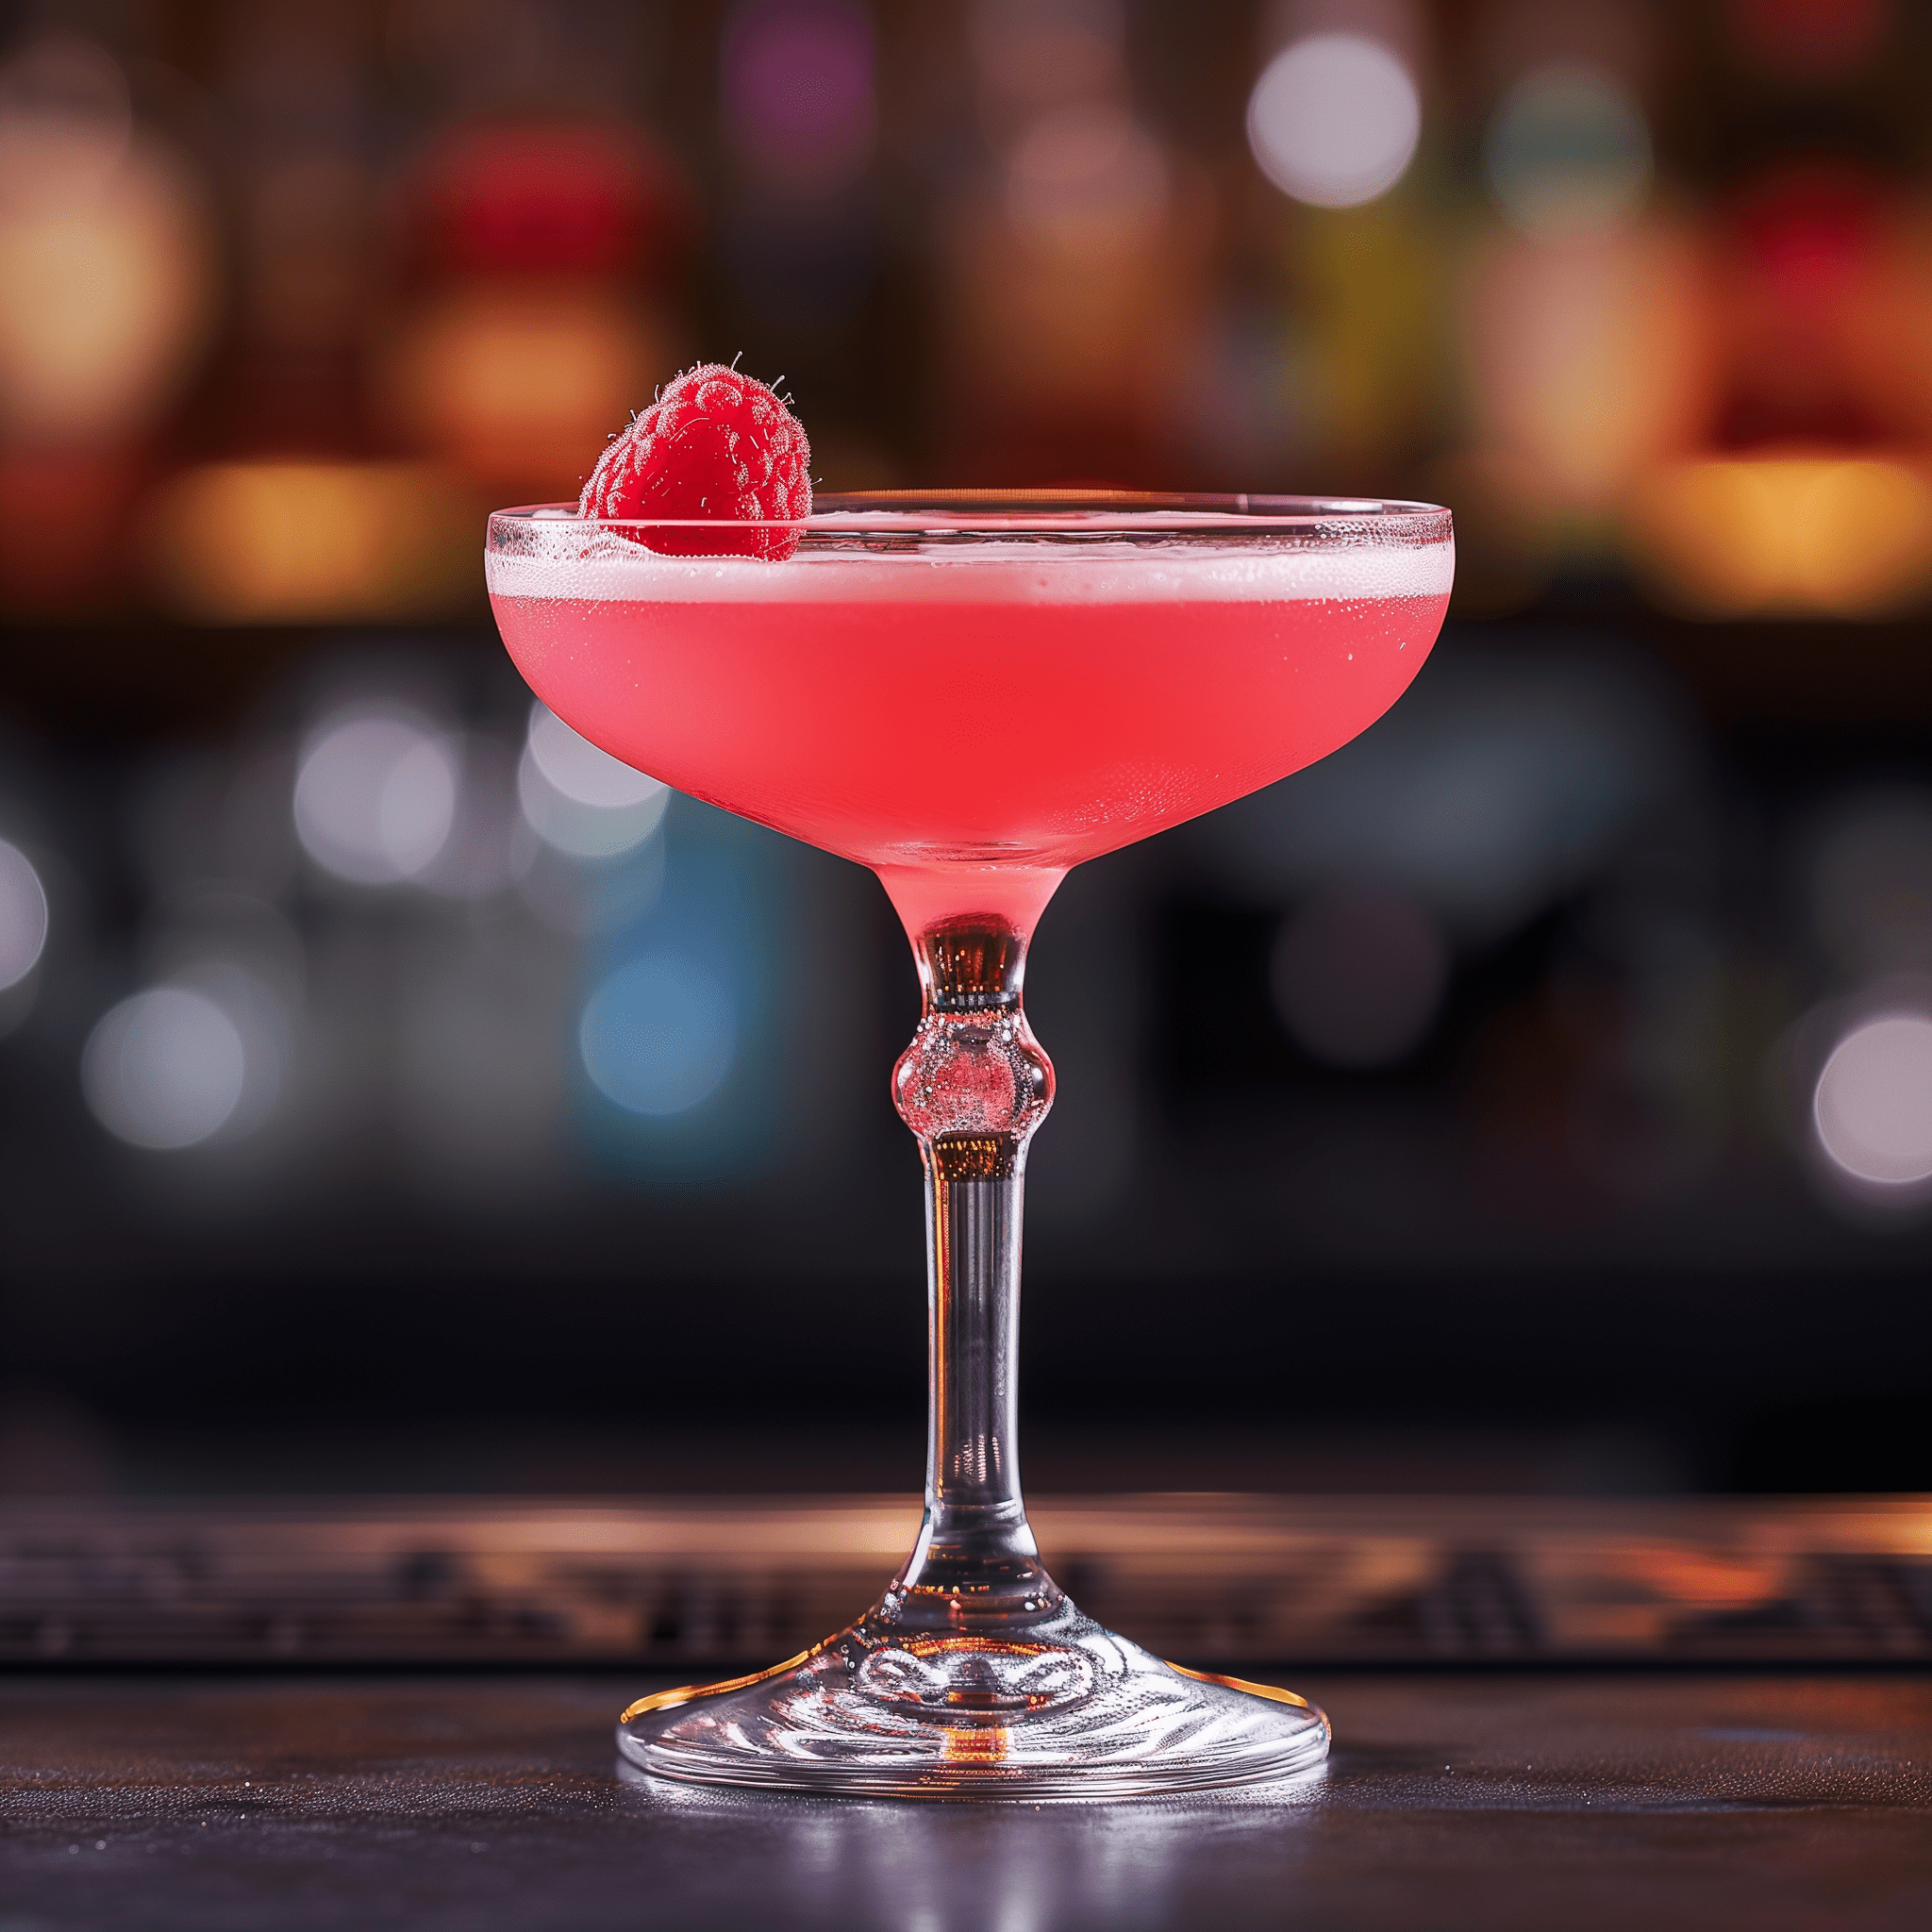 Cosmonaut Cocktail Recipe - The Cosmonaut cocktail offers a delightful balance of sweet and tart flavors, with the raspberry jam providing a fruity depth that complements the botanical notes of the gin. The lemon juice adds a refreshing citrus zing, making it a well-rounded and invigorating drink.